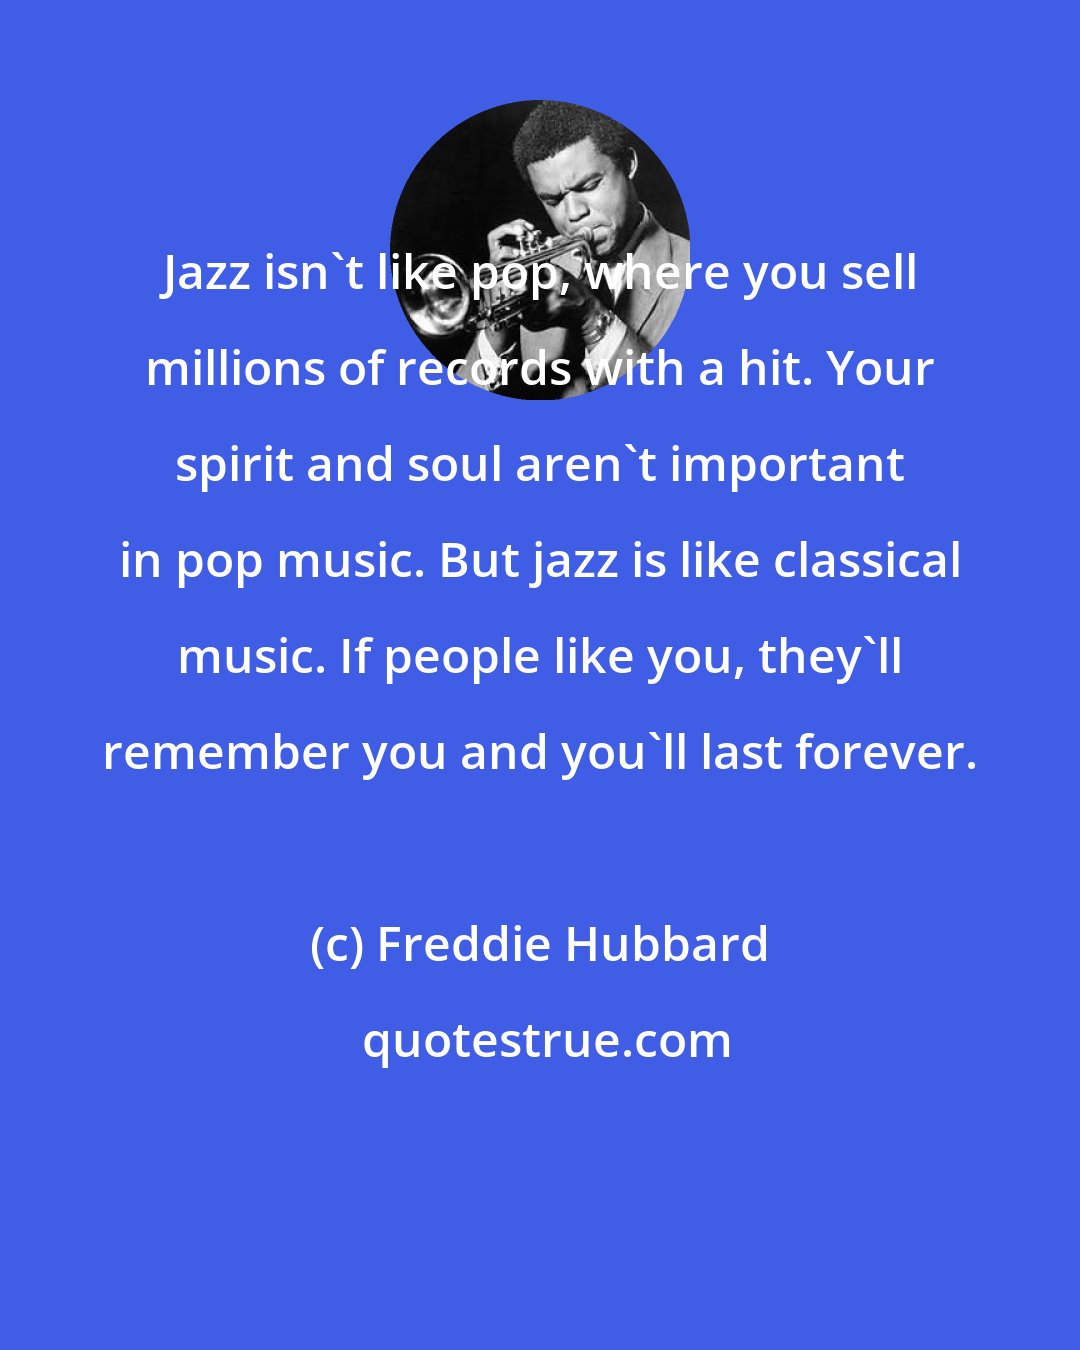 Freddie Hubbard: Jazz isn't like pop, where you sell millions of records with a hit. Your spirit and soul aren't important in pop music. But jazz is like classical music. If people like you, they'll remember you and you'll last forever.